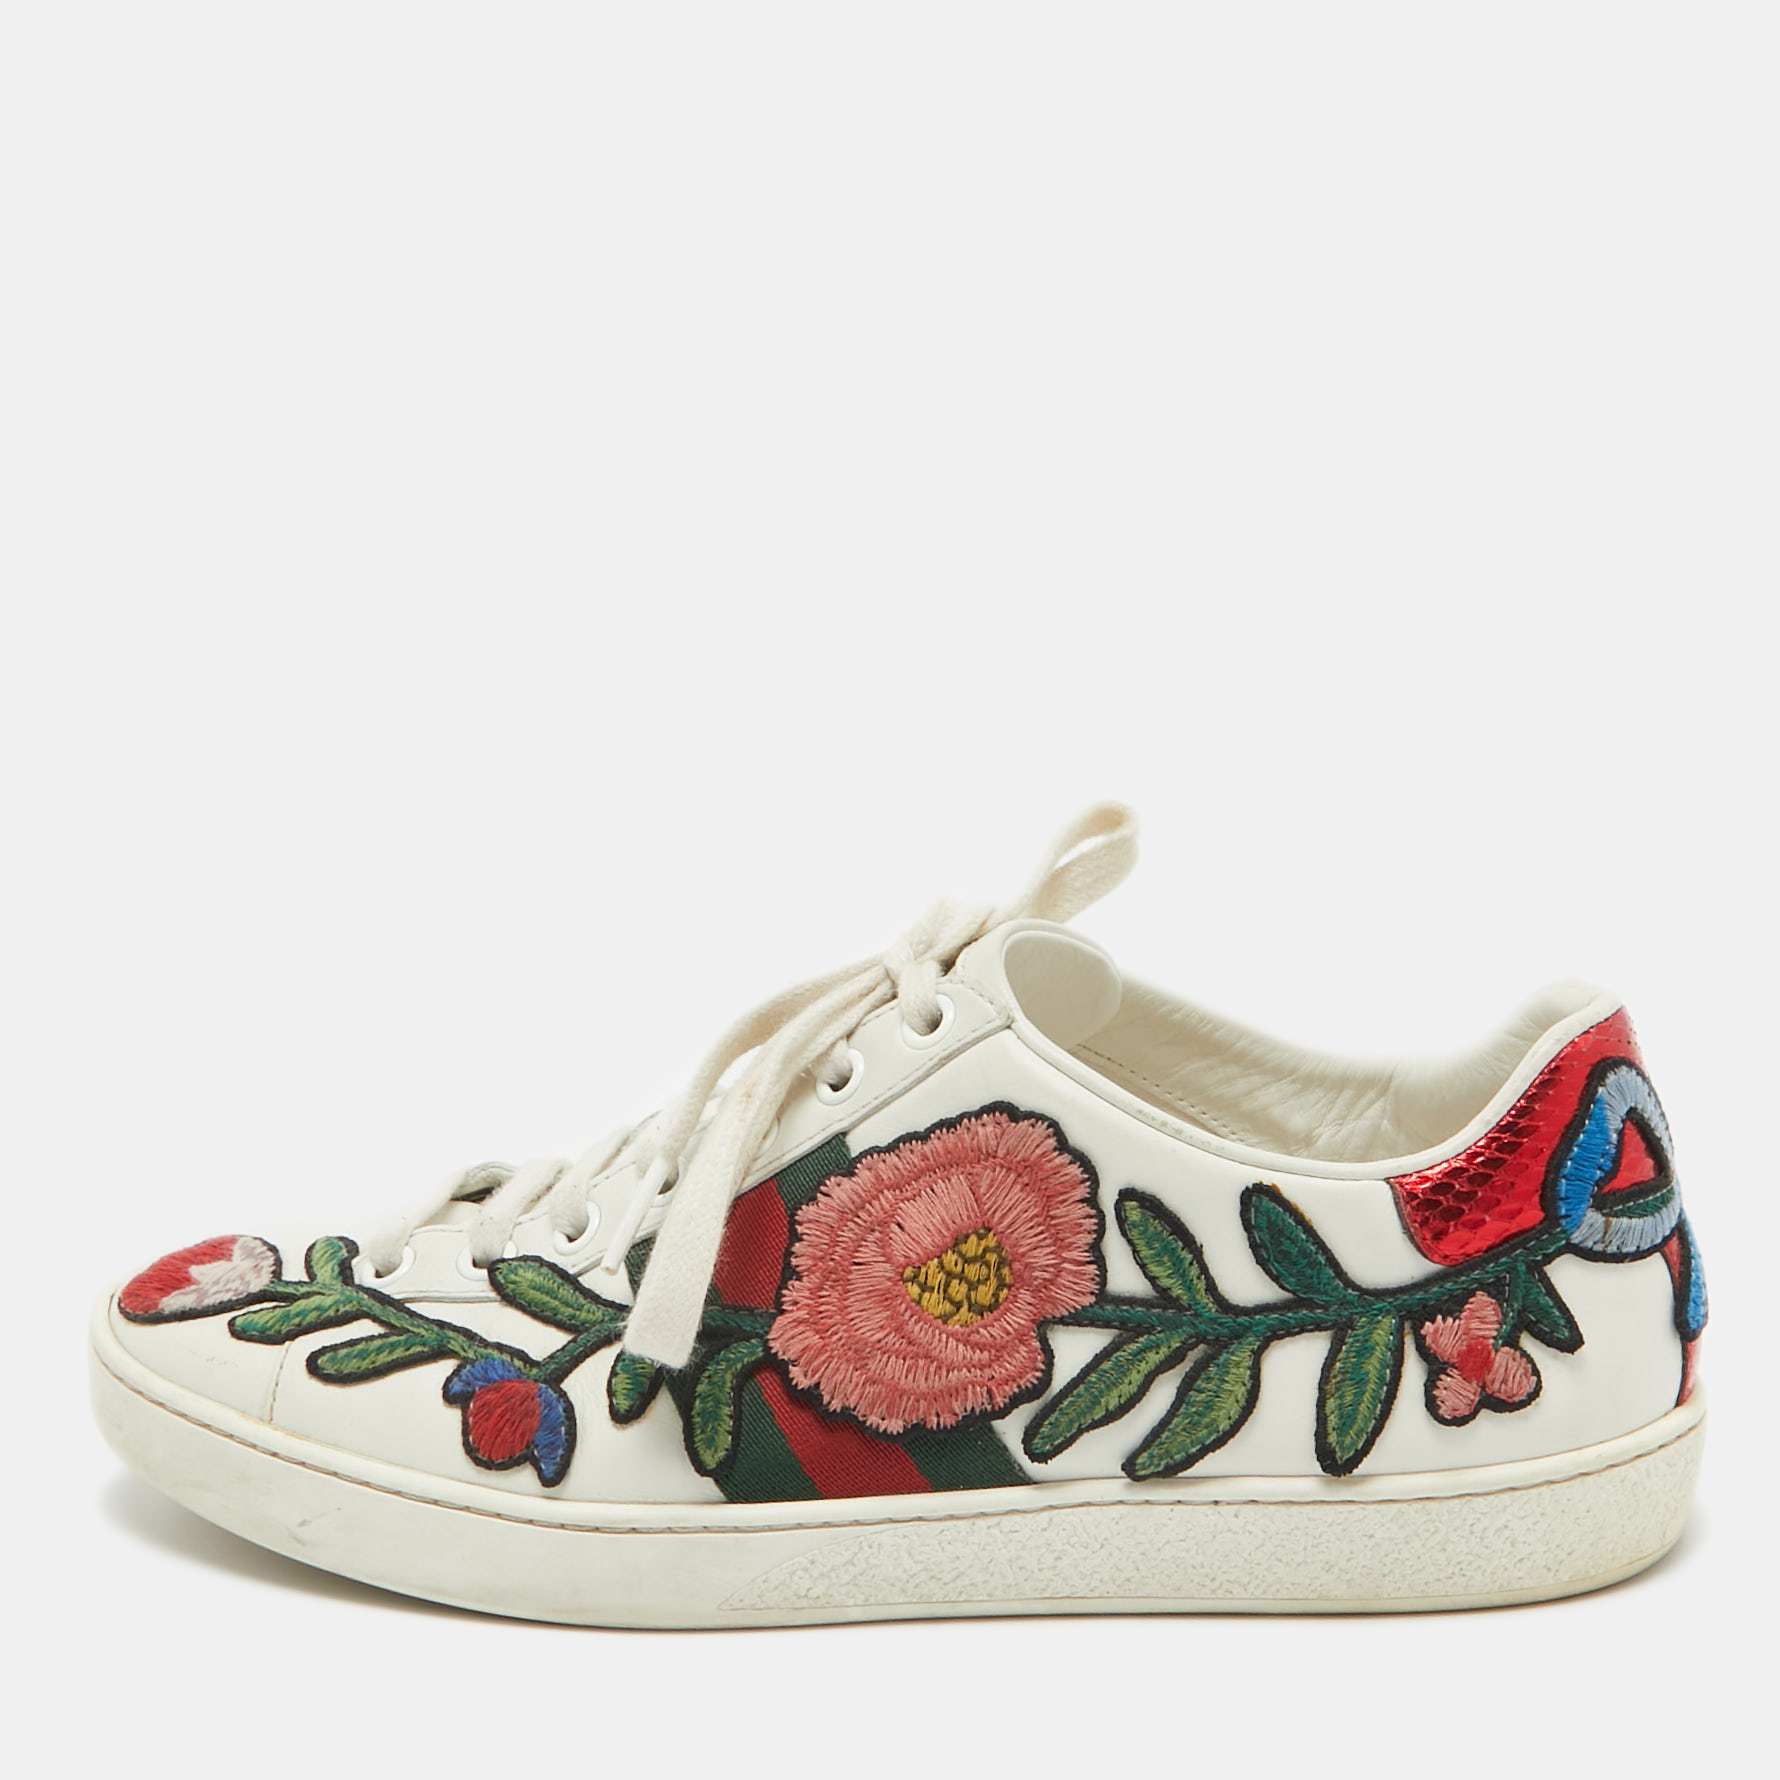 Gucci white floral embroidered leather ace low top sneakers size 37